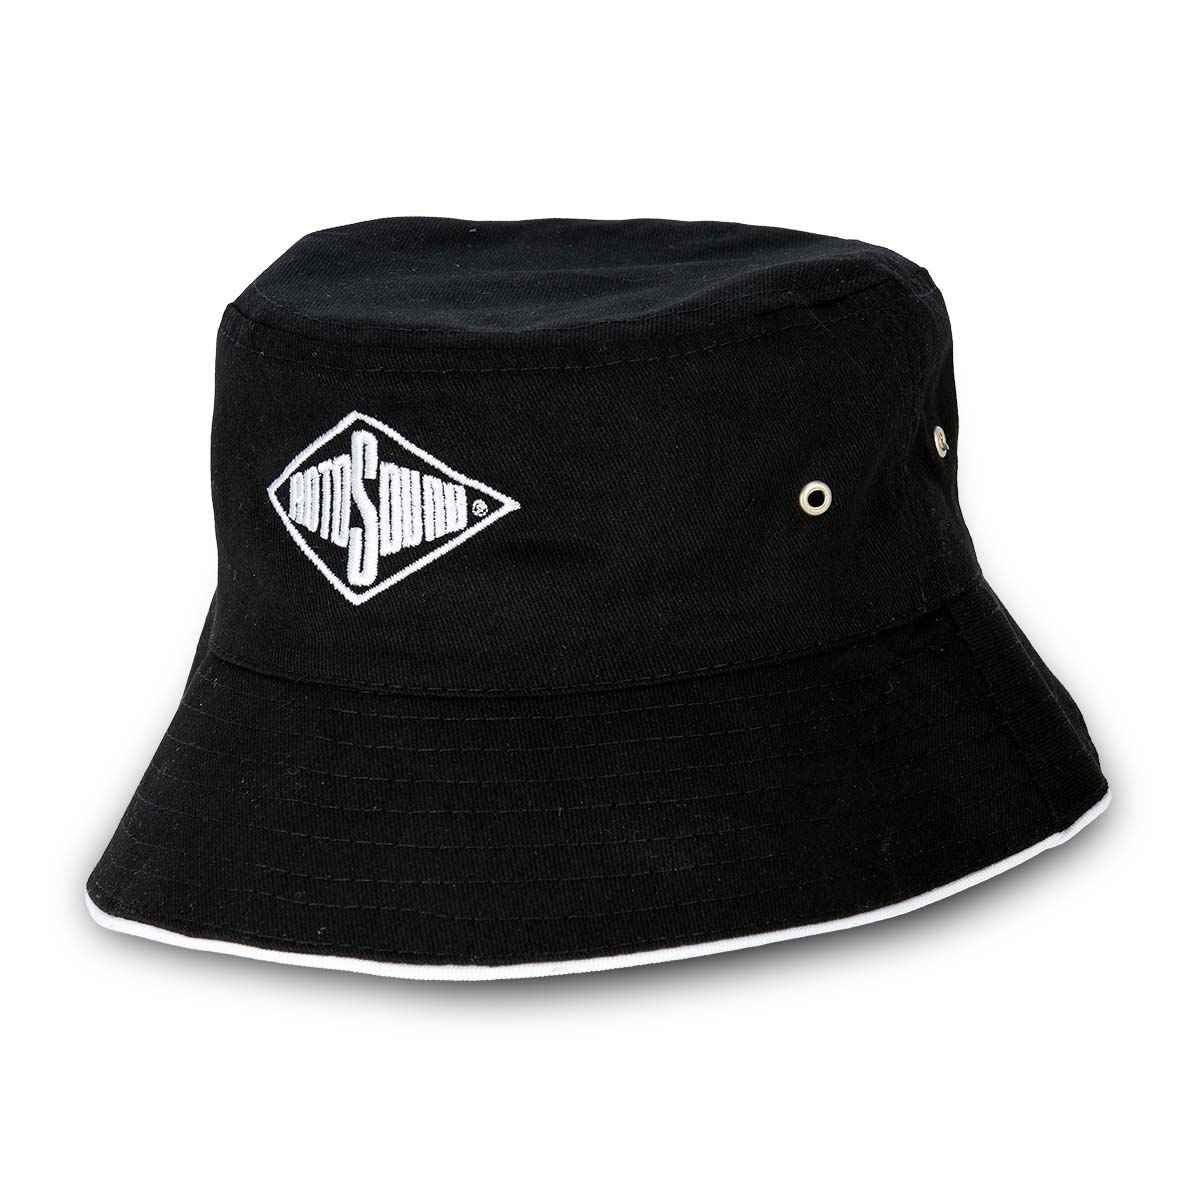 Rotosound Bucket Hat in Black • Rotosound Music Strings